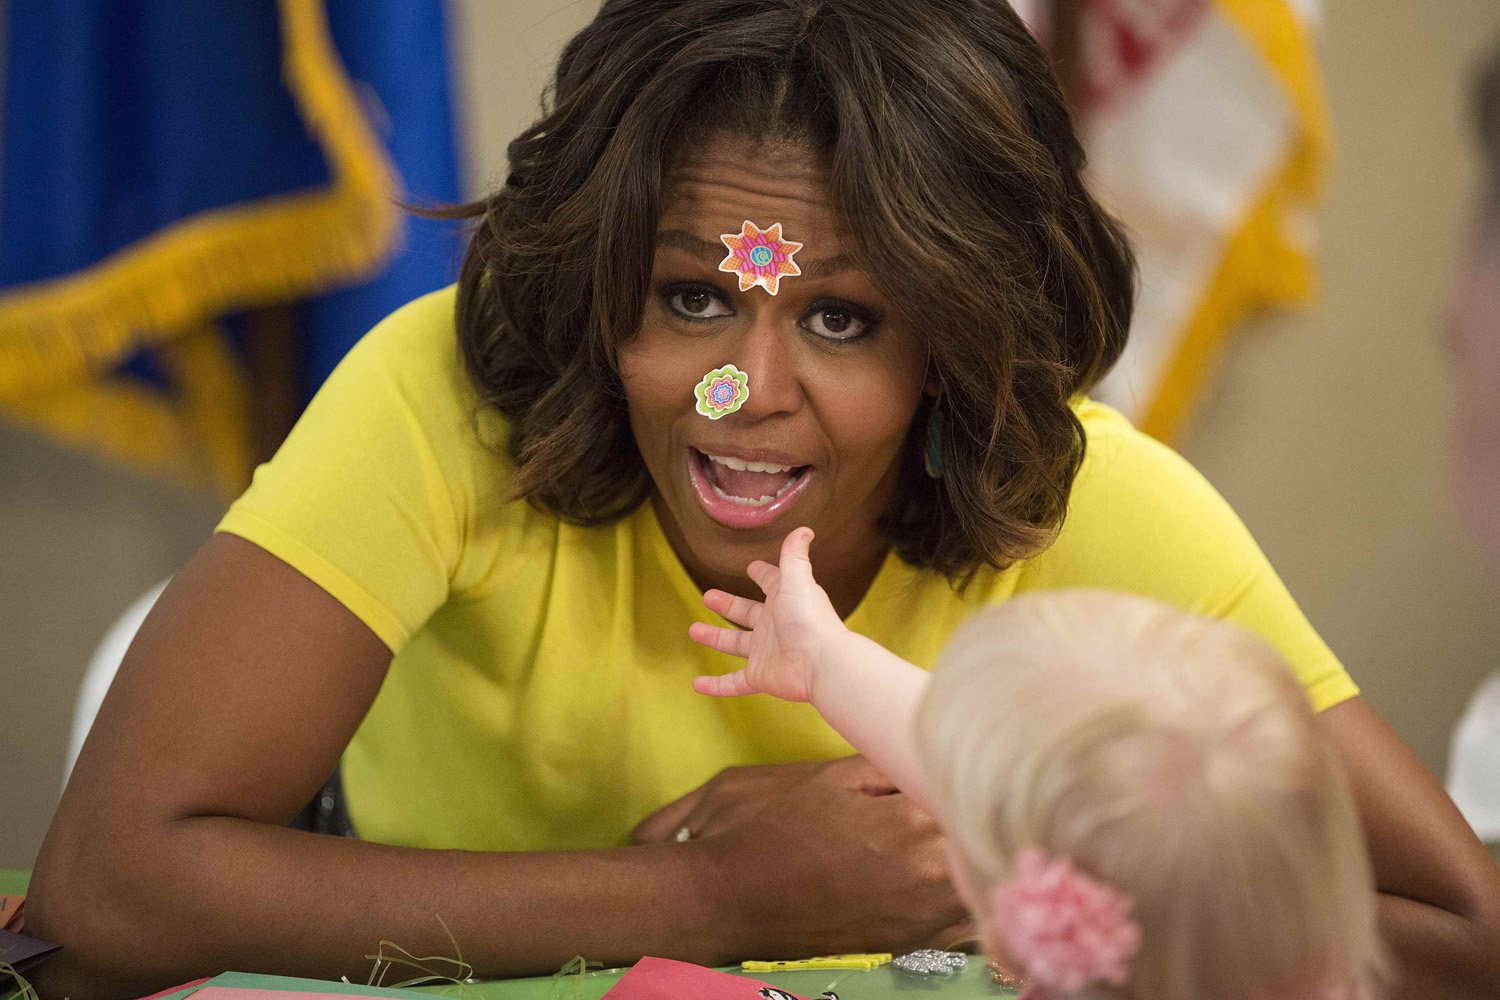 U.S. first lady Michelle Obama has stickers put on her face by 20-month-old Lily Oppelt during a visit with children at the Fisher House at Walter Reed National Military Medical Center in Bethesda, Maryland April 14, 2014.